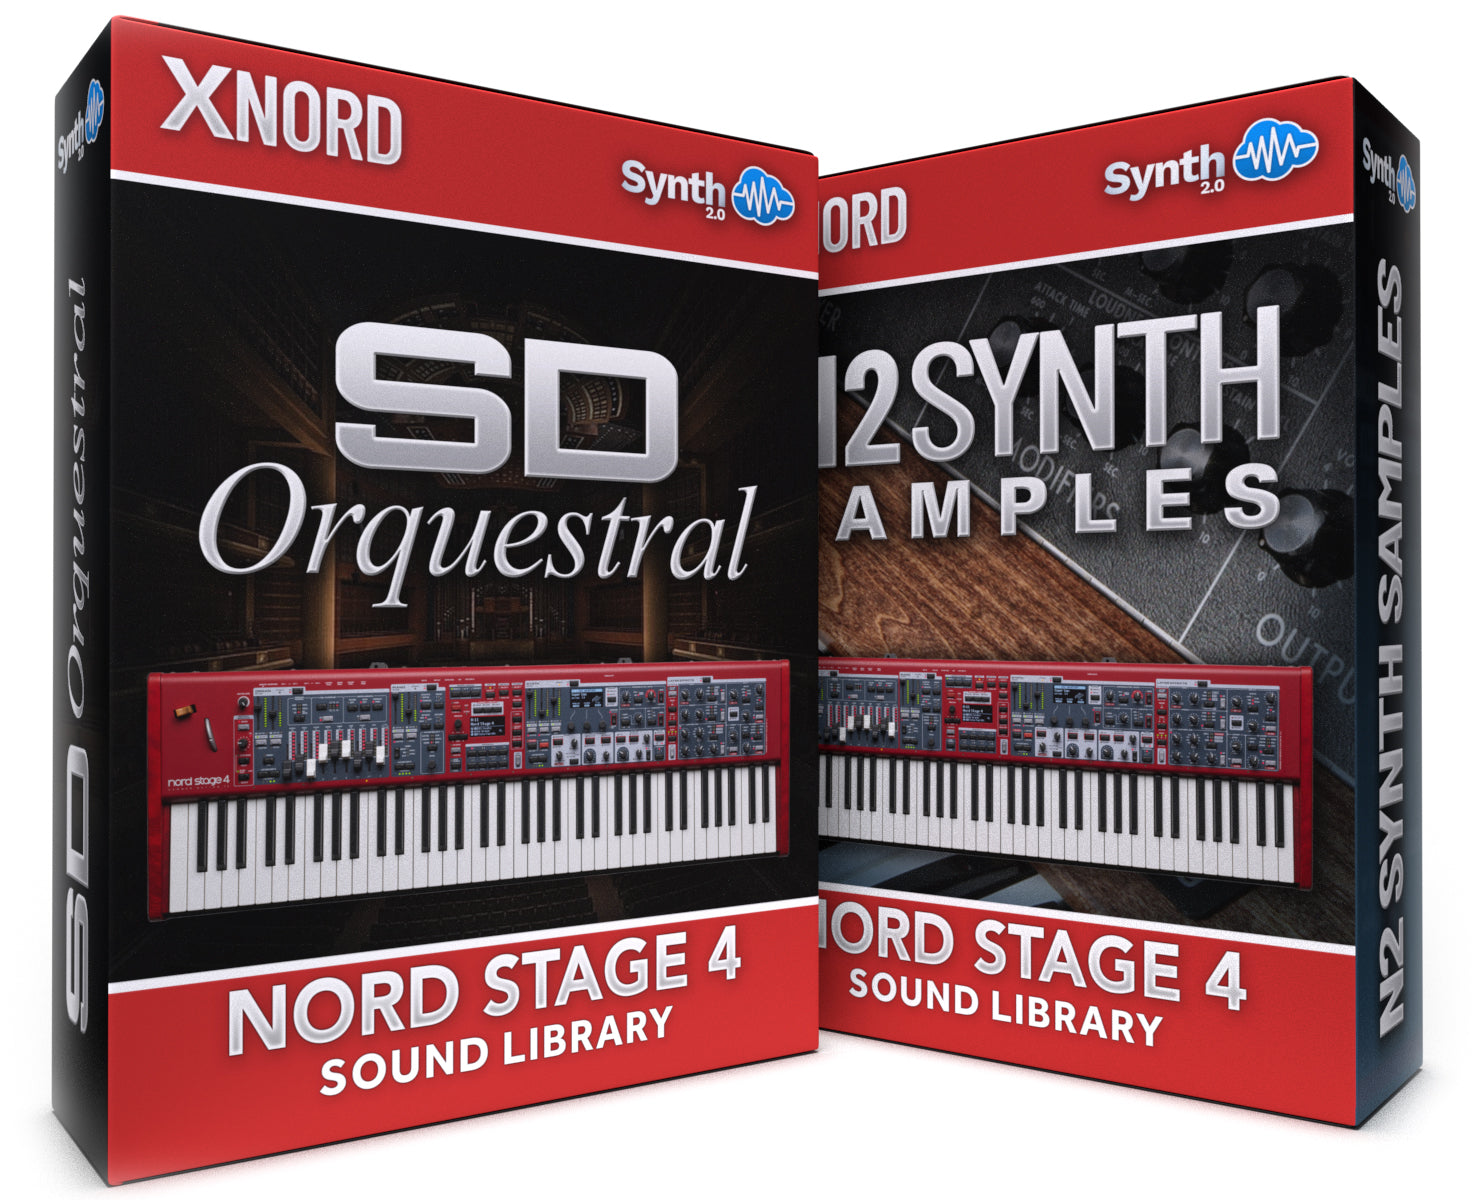 SCL422 - ( Bundle ) - SD Orquestral + N2 Synth Samples - Nord Stage 4